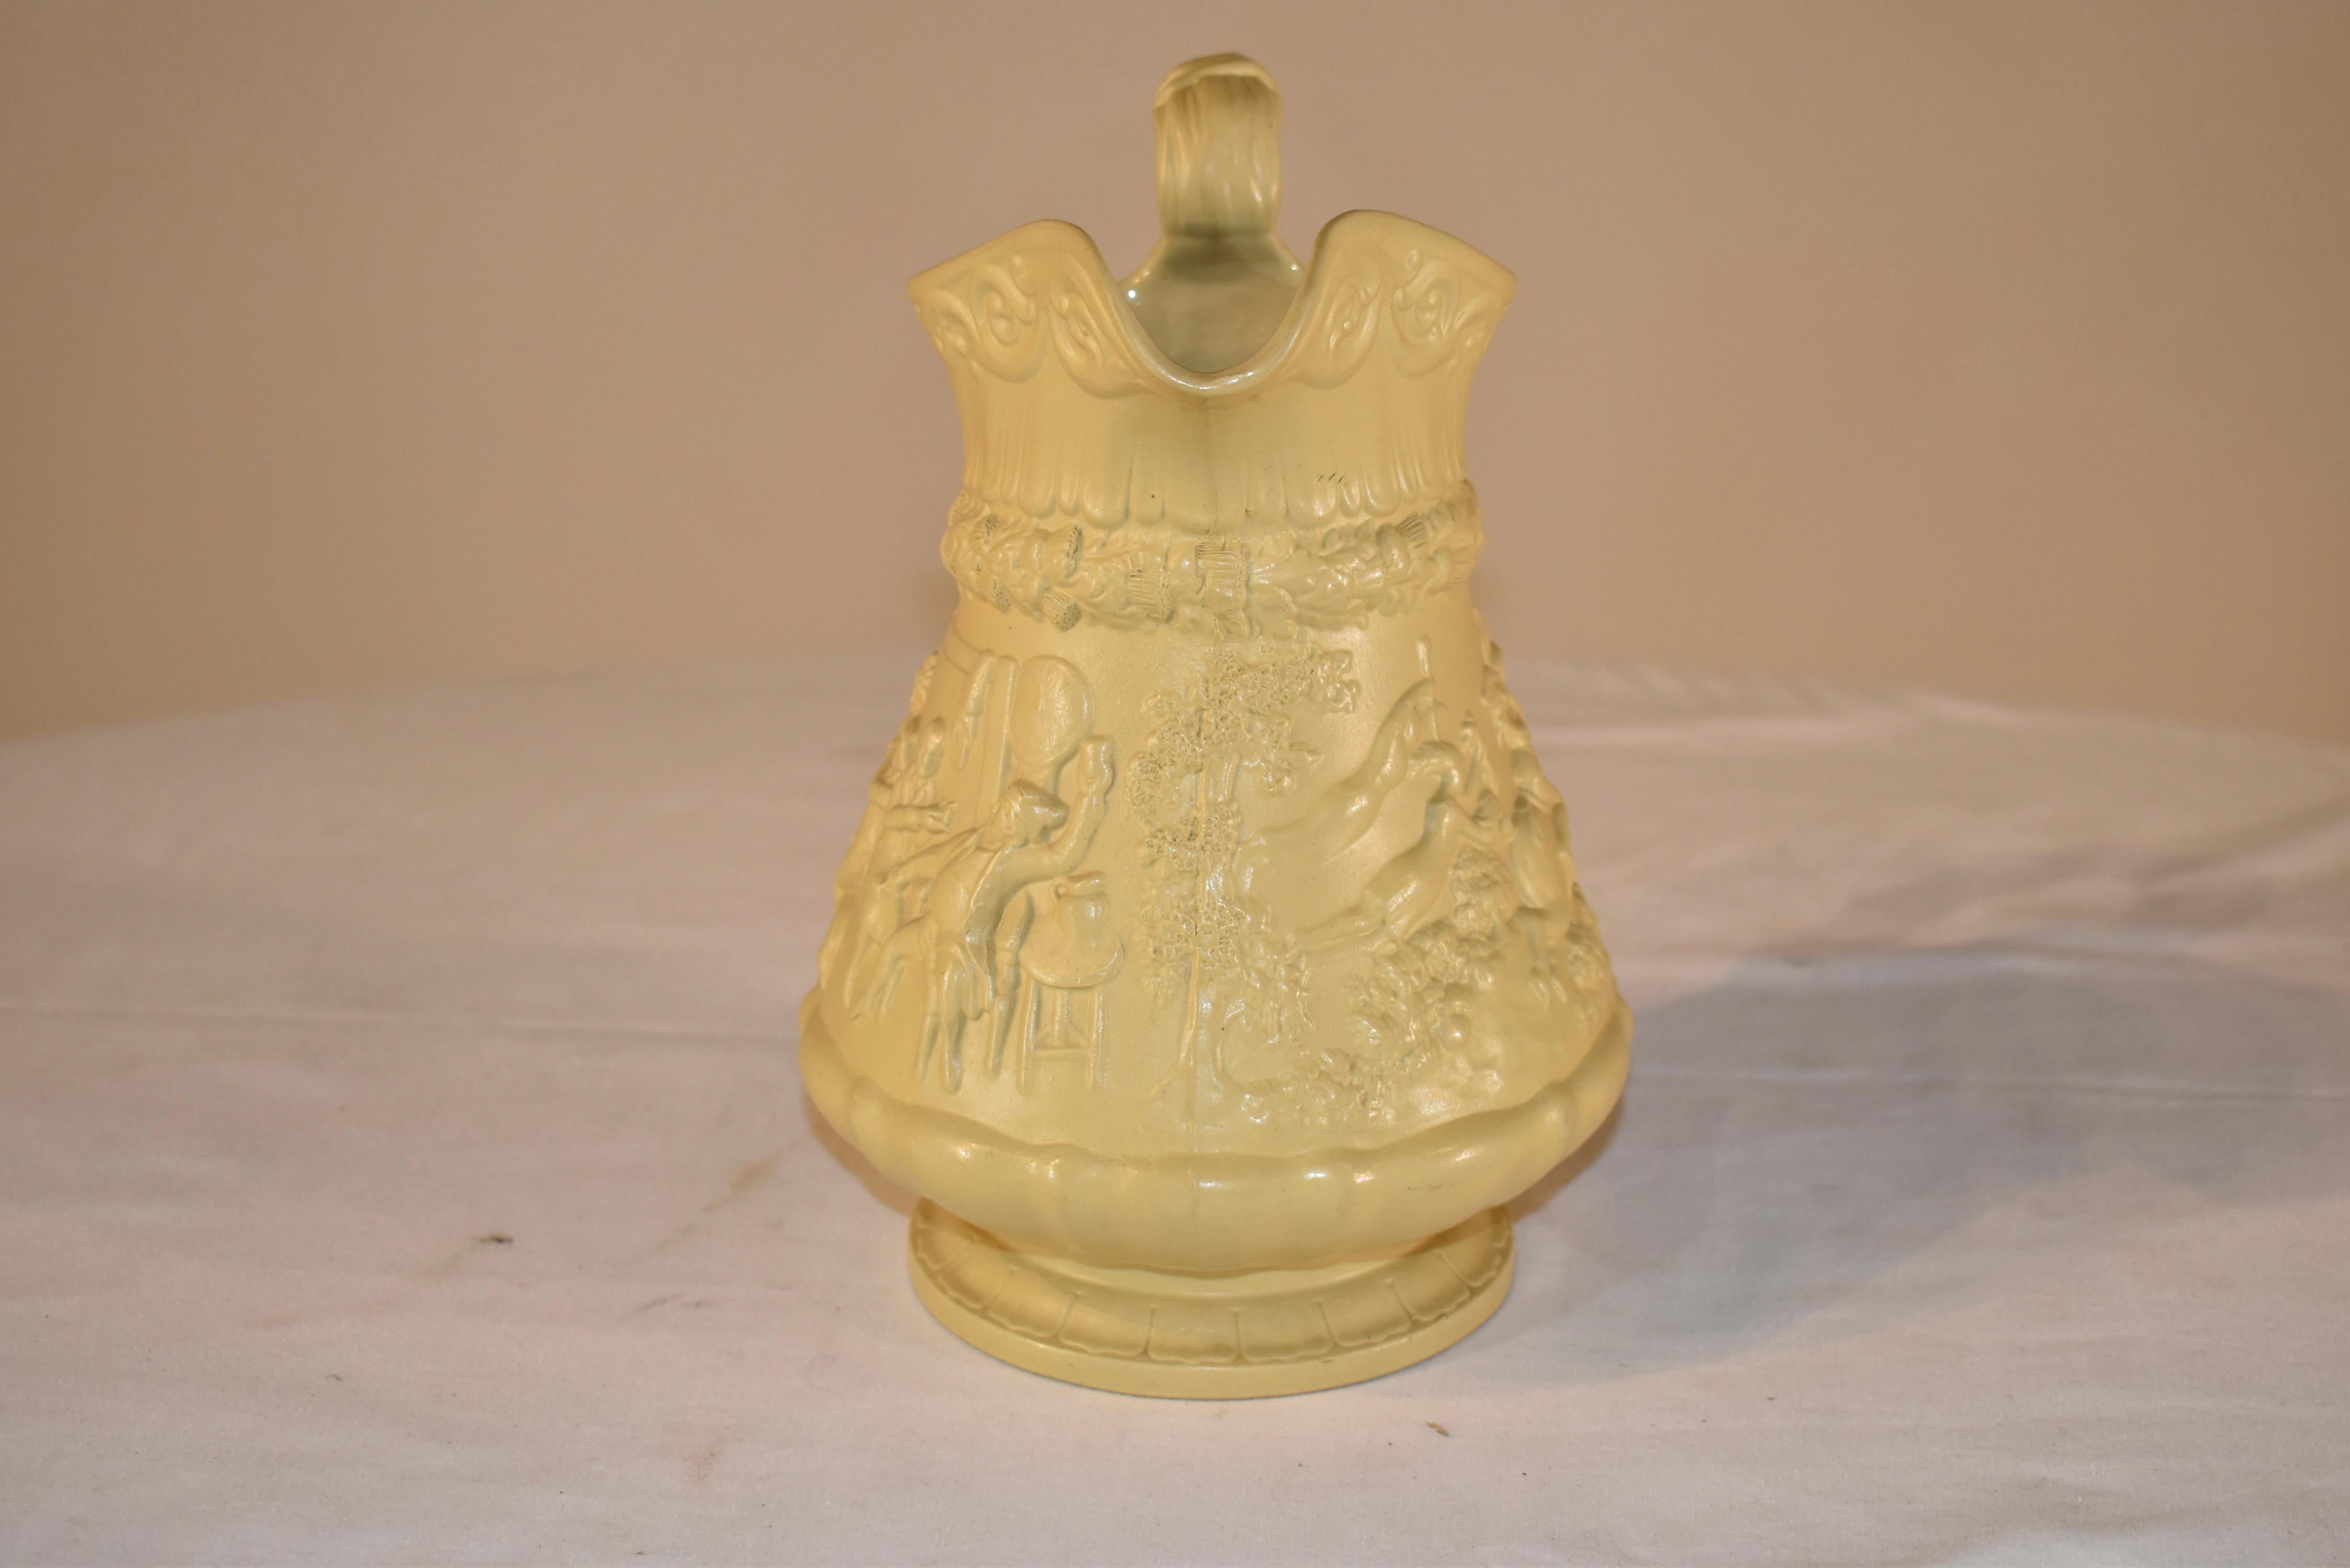 Splendid W. Ridgway & Co. drab ware pitcher which is dated on the bottom with an impressed mark October 1, 1835. This pitcher is in a patter depicting a village scene including a pub and a horse race outside. the handle is exquisitely molded and